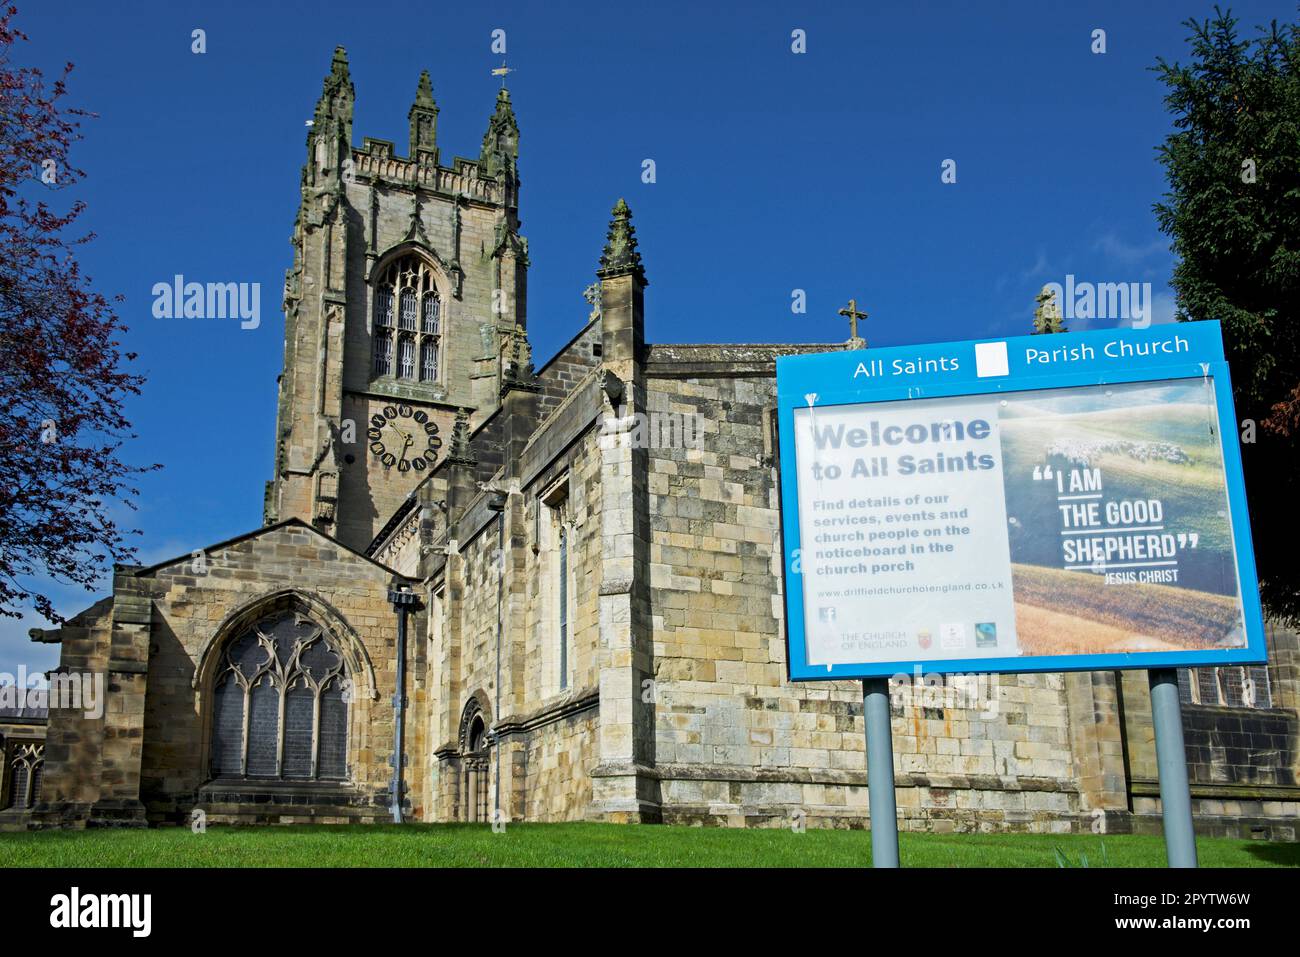 All Saints Church in Driffield, East Yorkshire, England UK Stock Photo